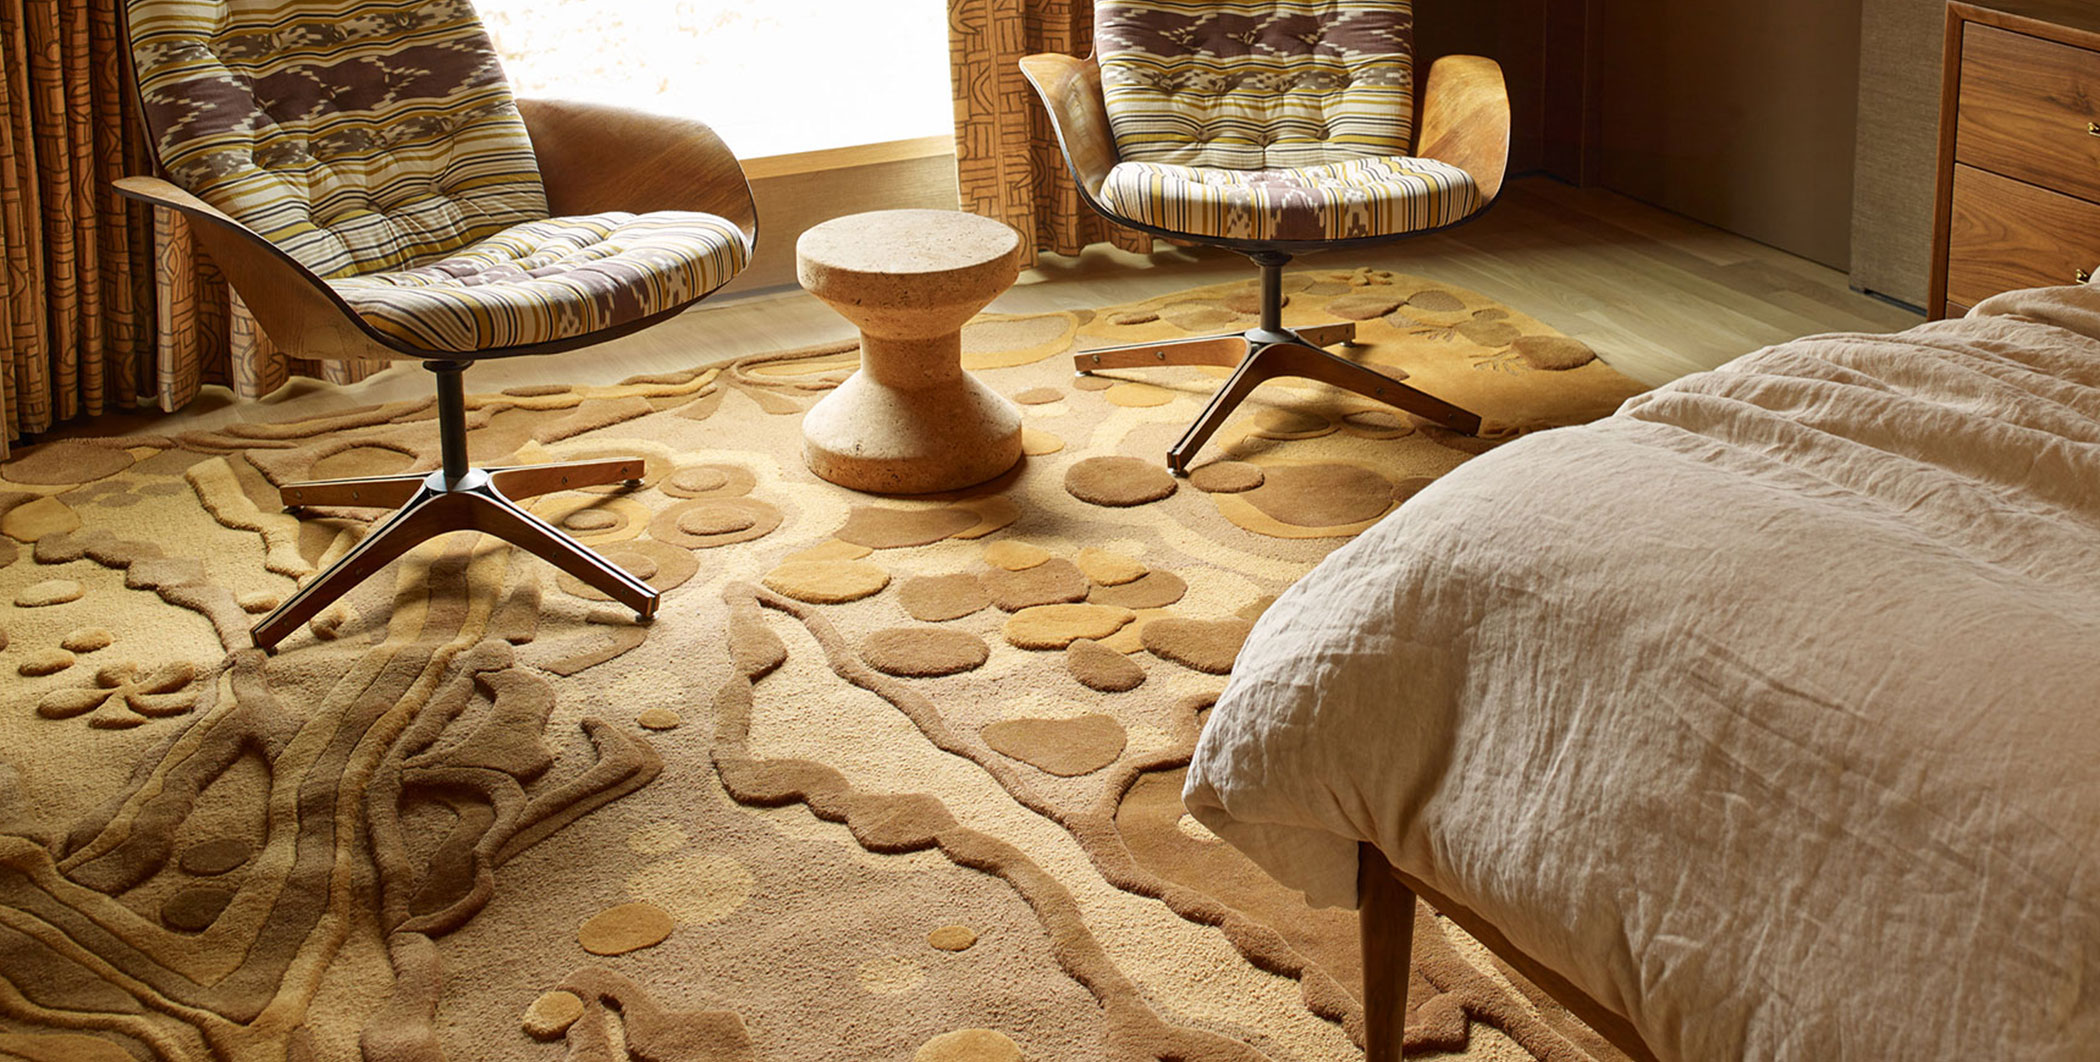 Two embroidered chairs in a sunlit bedroom with a beautiful, copper colored rug.